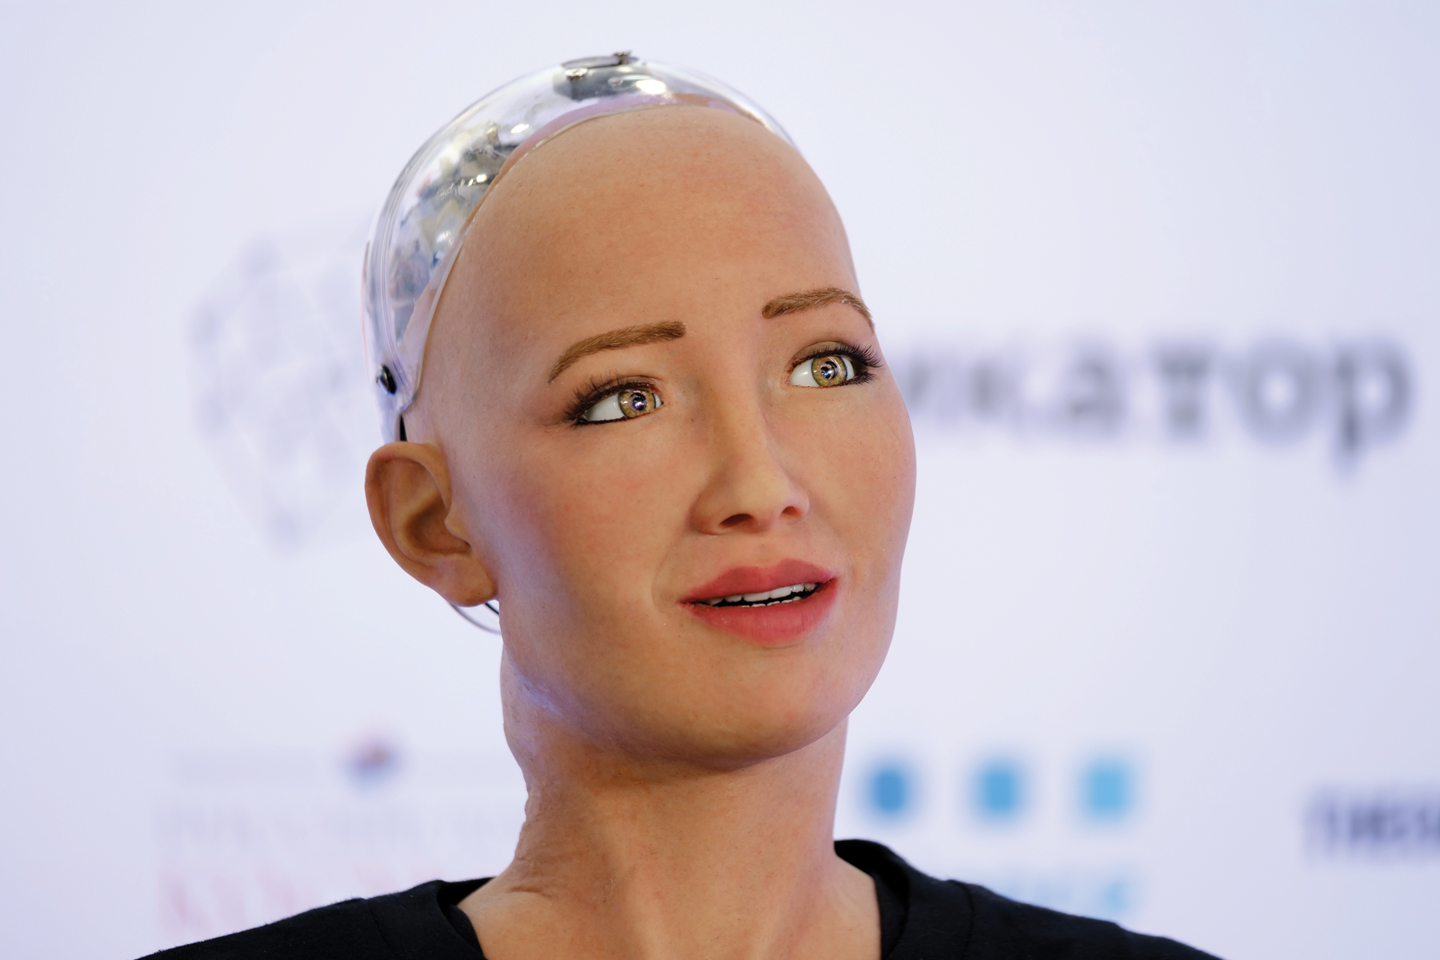 Made by the Hong Kong-based Hanson Robotics, Sophia has been criticized as a hype by prominent AI researchers like Yann LeCunn <em>(Anton Gvozdikov / Shutterstock.com)</em>